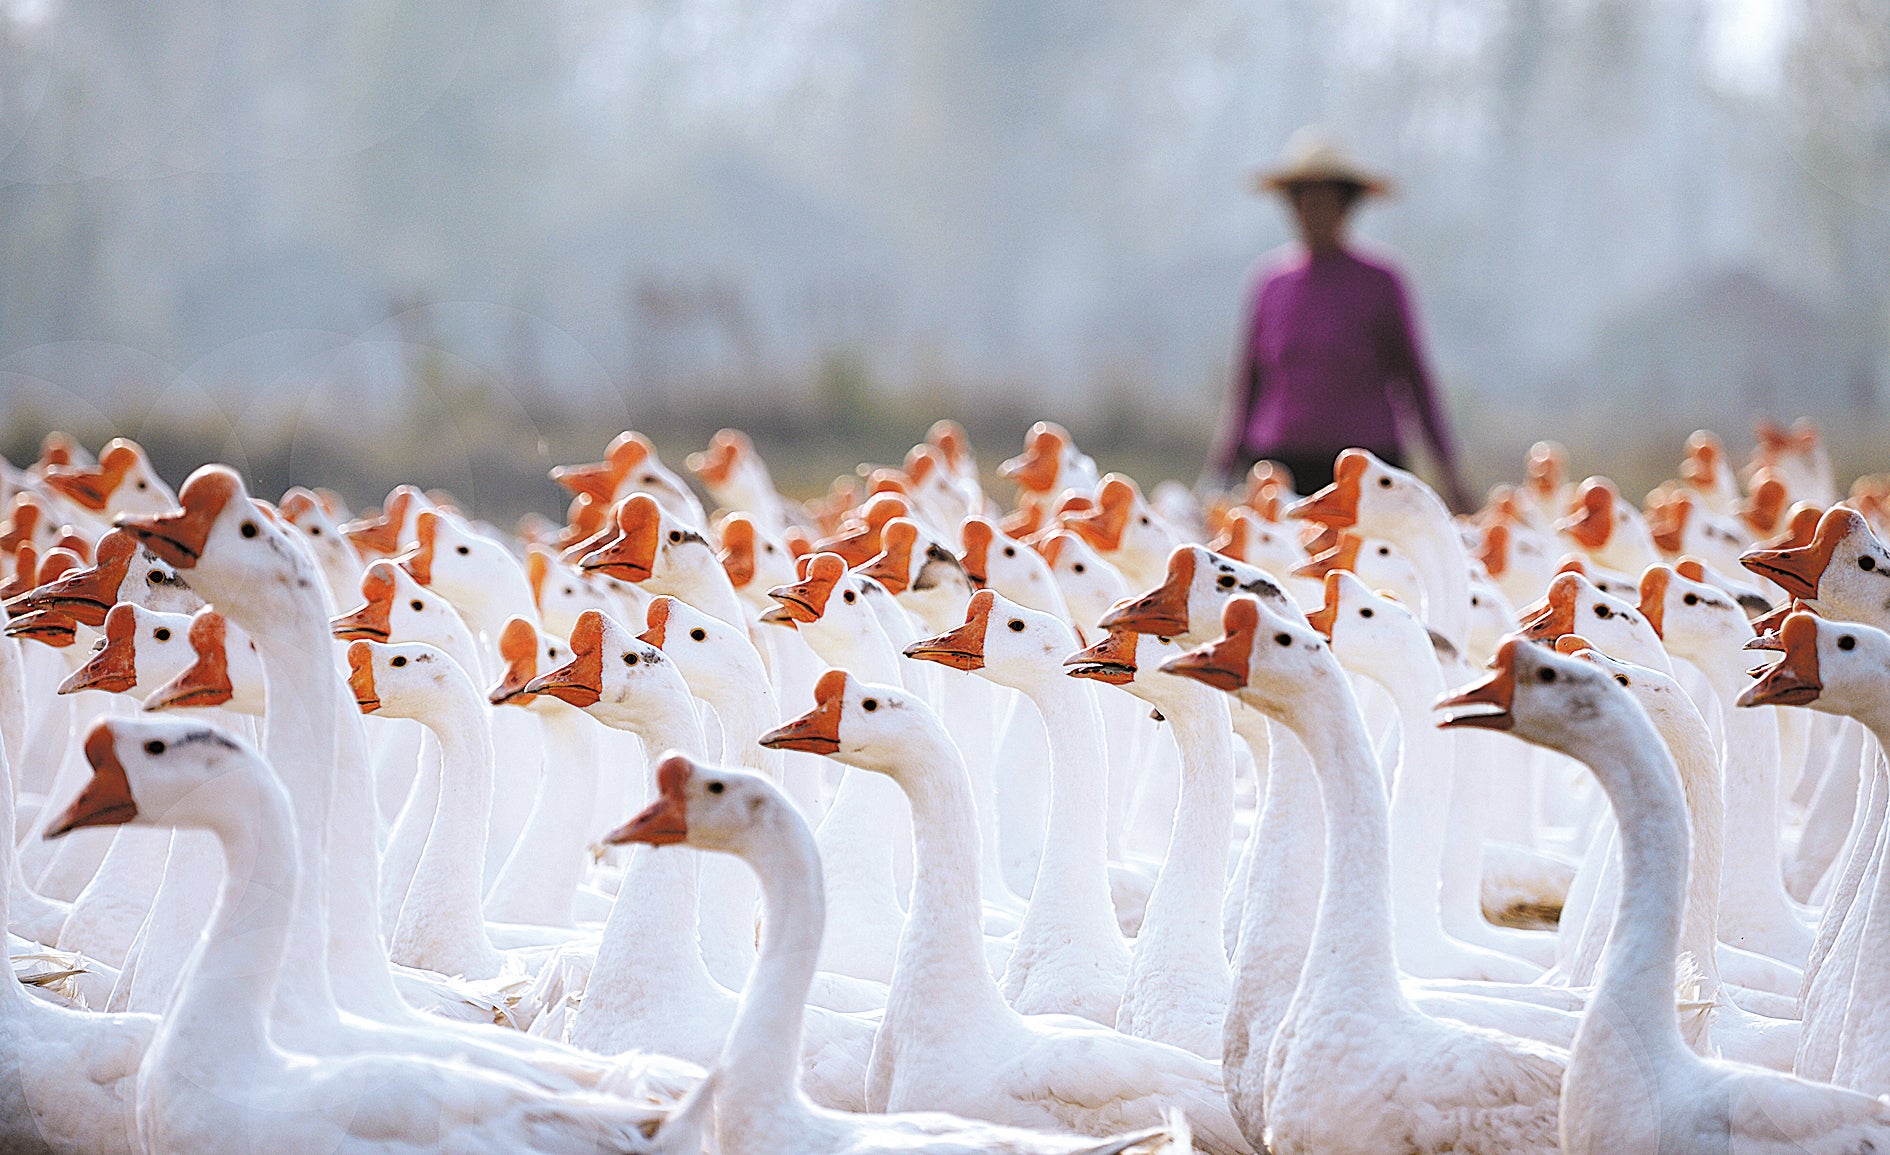 A farmer takes a flock of Wanxi white geese to graze in Lu’an, Anhui province